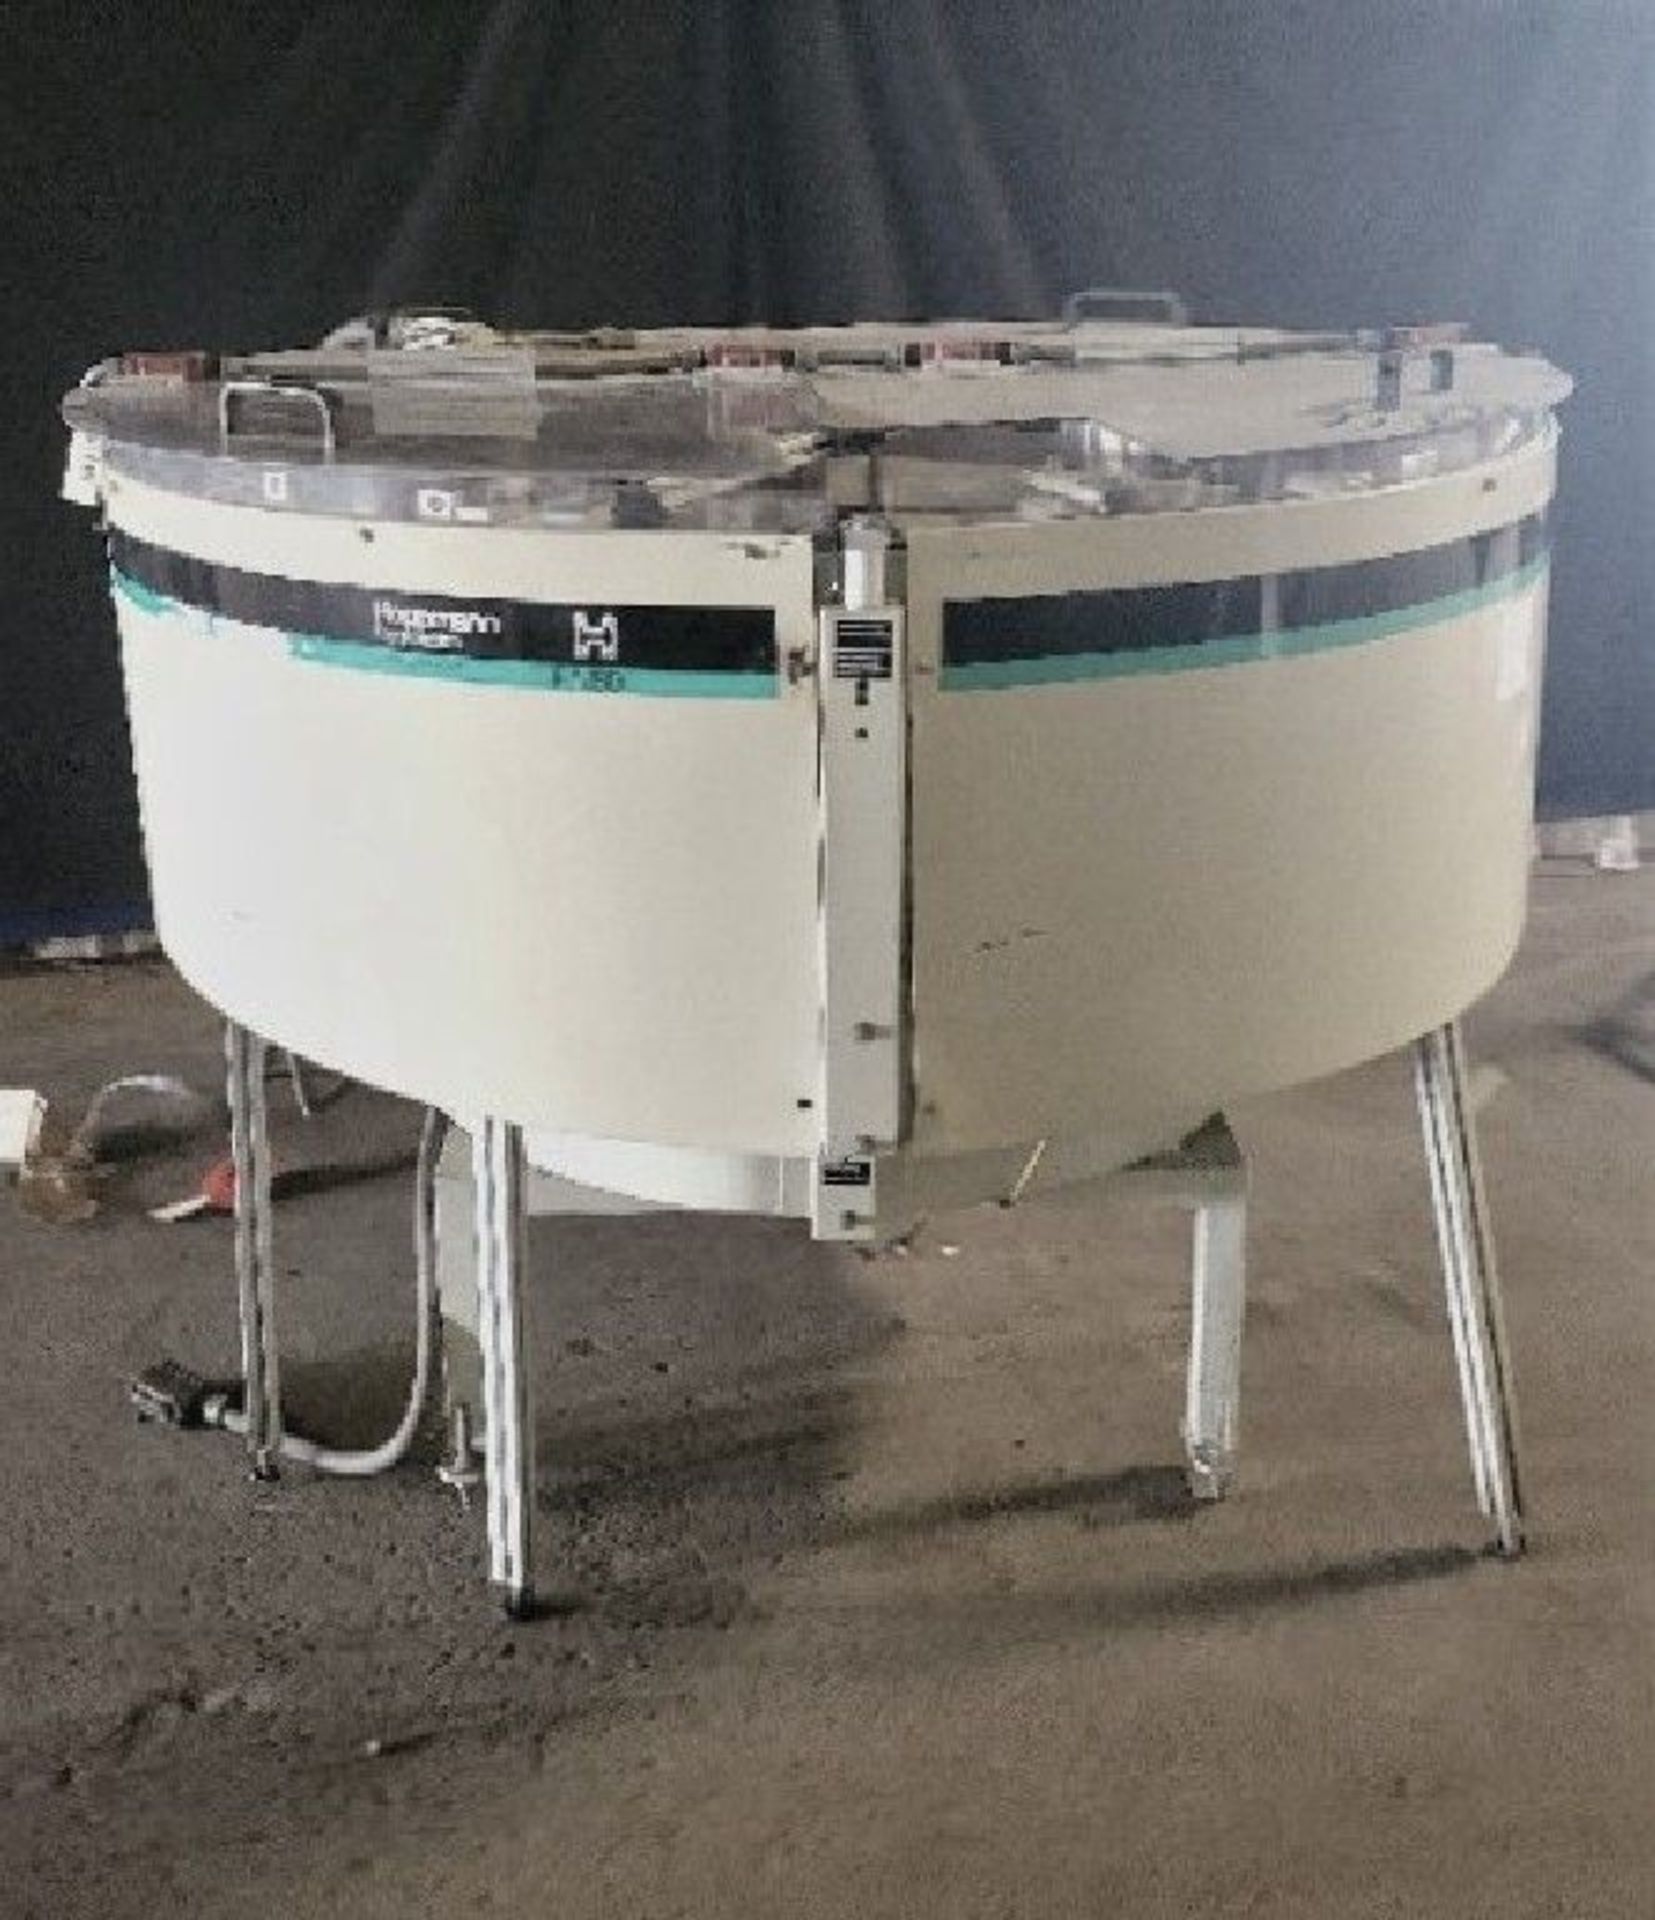 Qty (1) Hoppmann FT 50 Centrifugal Sorter - FT/50 - In excellent Running Condition - Includes